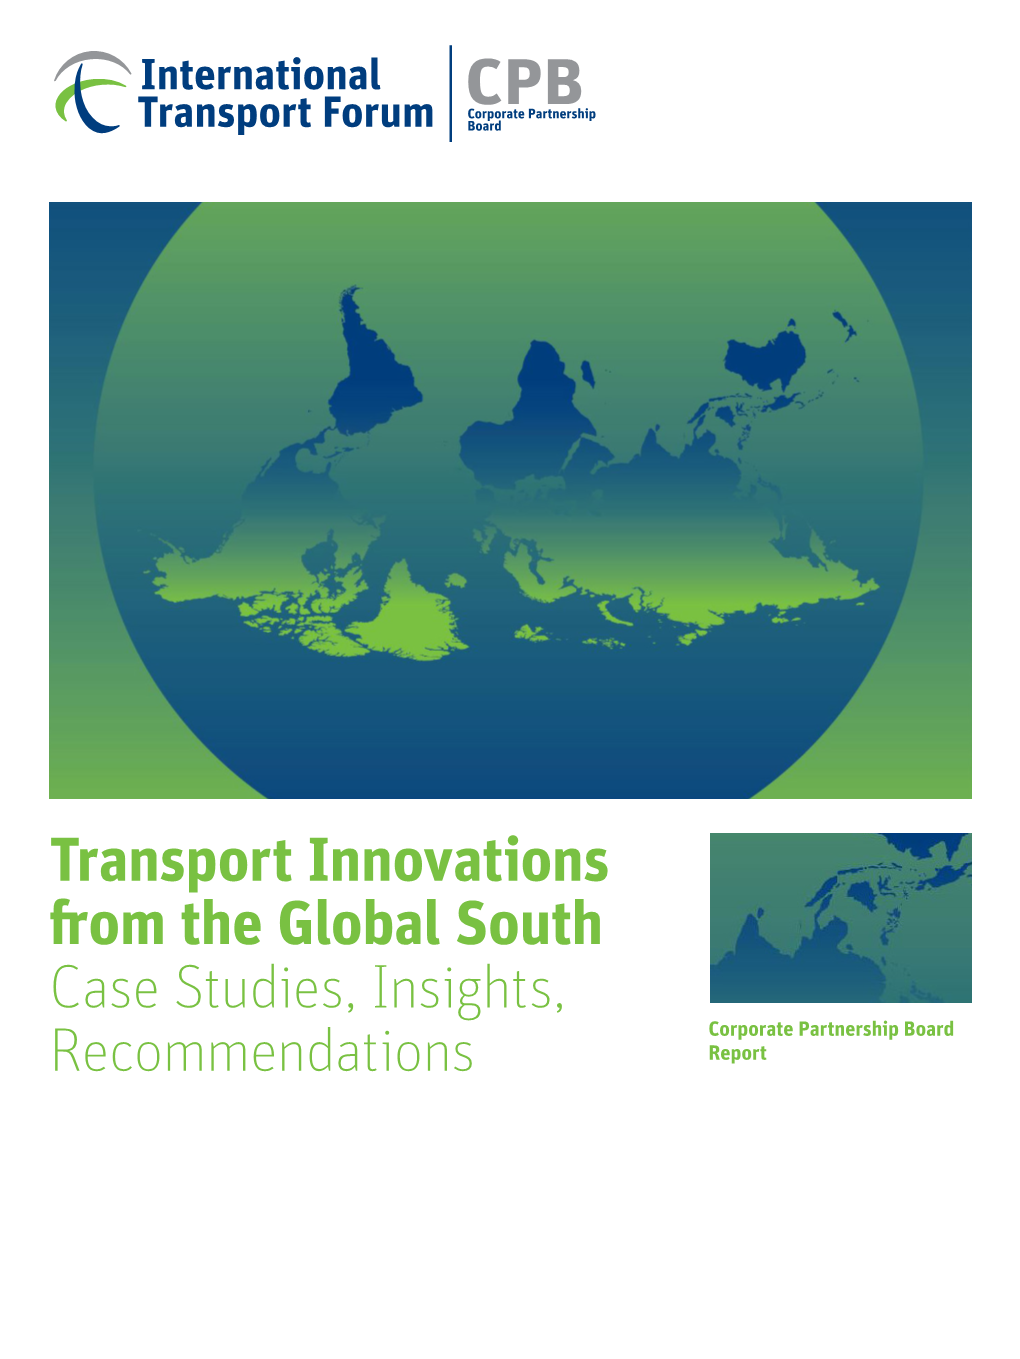 Transport Innovations from the Global South Case Studies